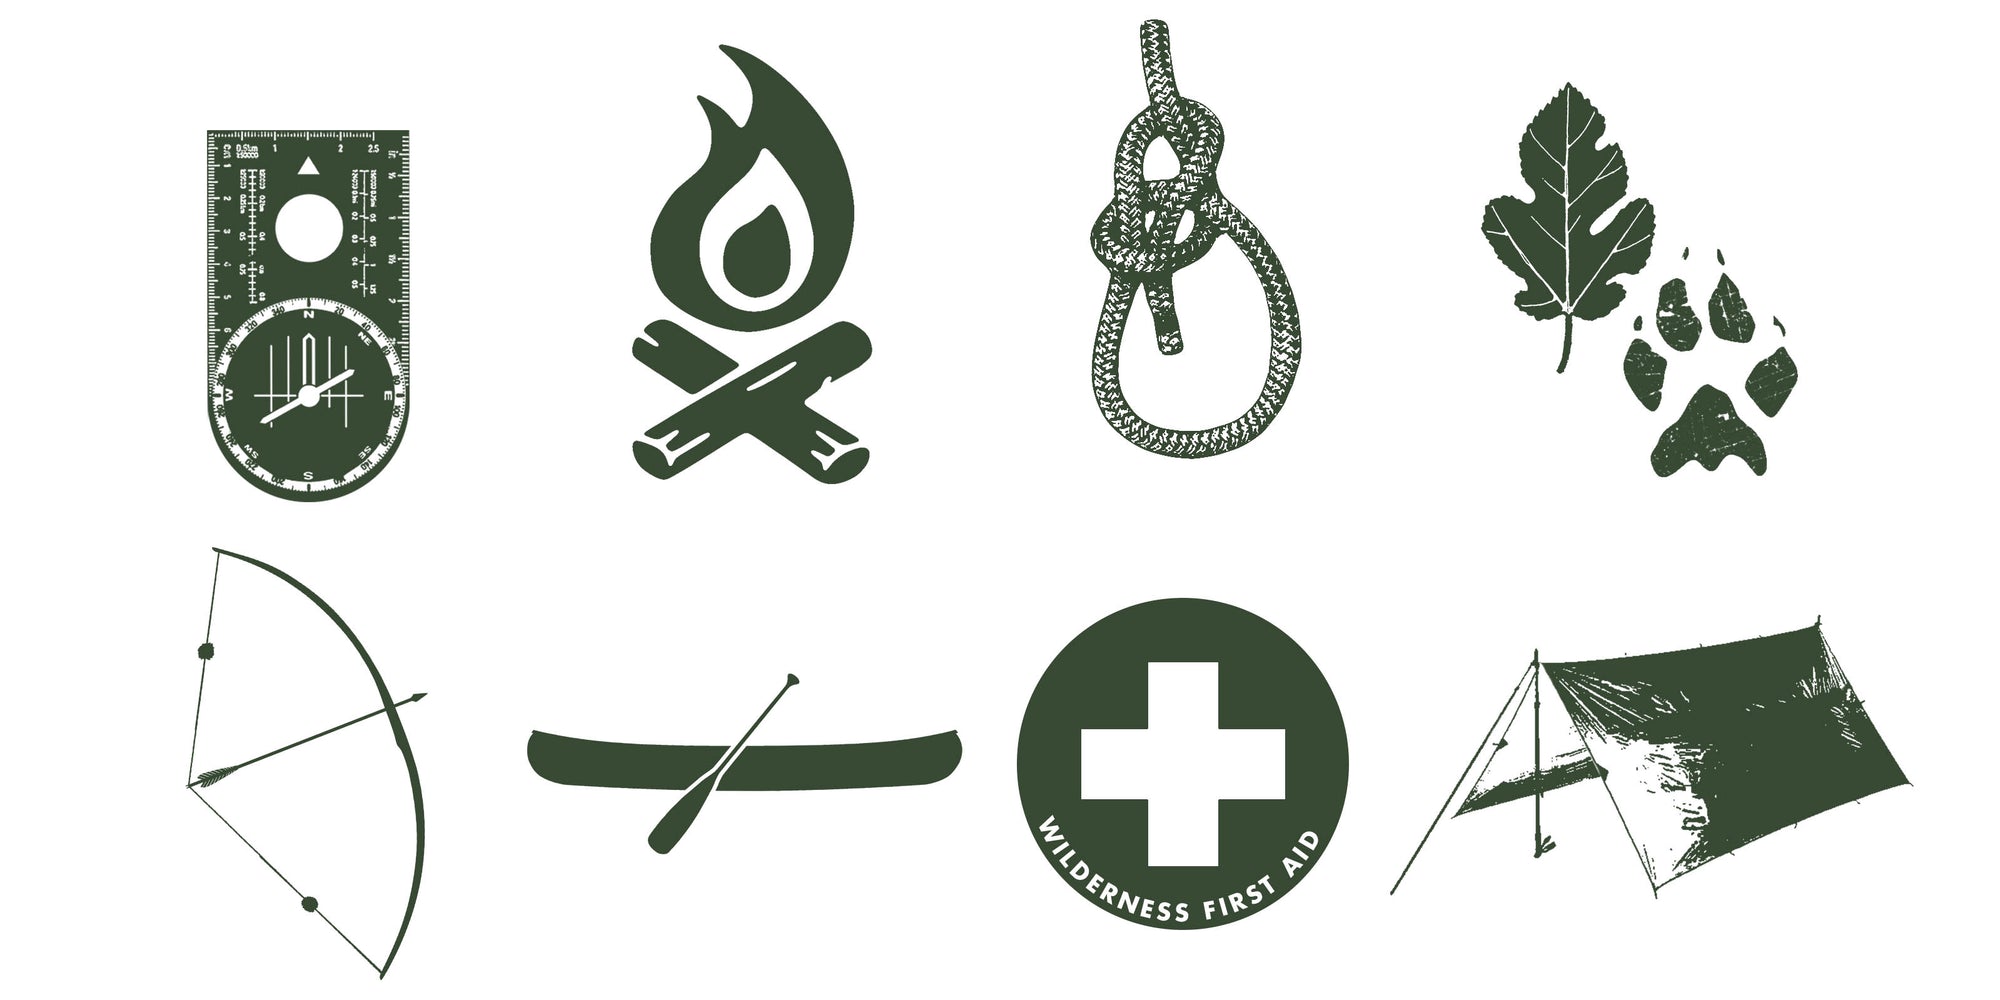 A series of monochrome graphics showing a compass, fire, rope and knots, a leaf and animal footprint, a traditional bow, a canoe, wilderness first aid, and a tarp tent.